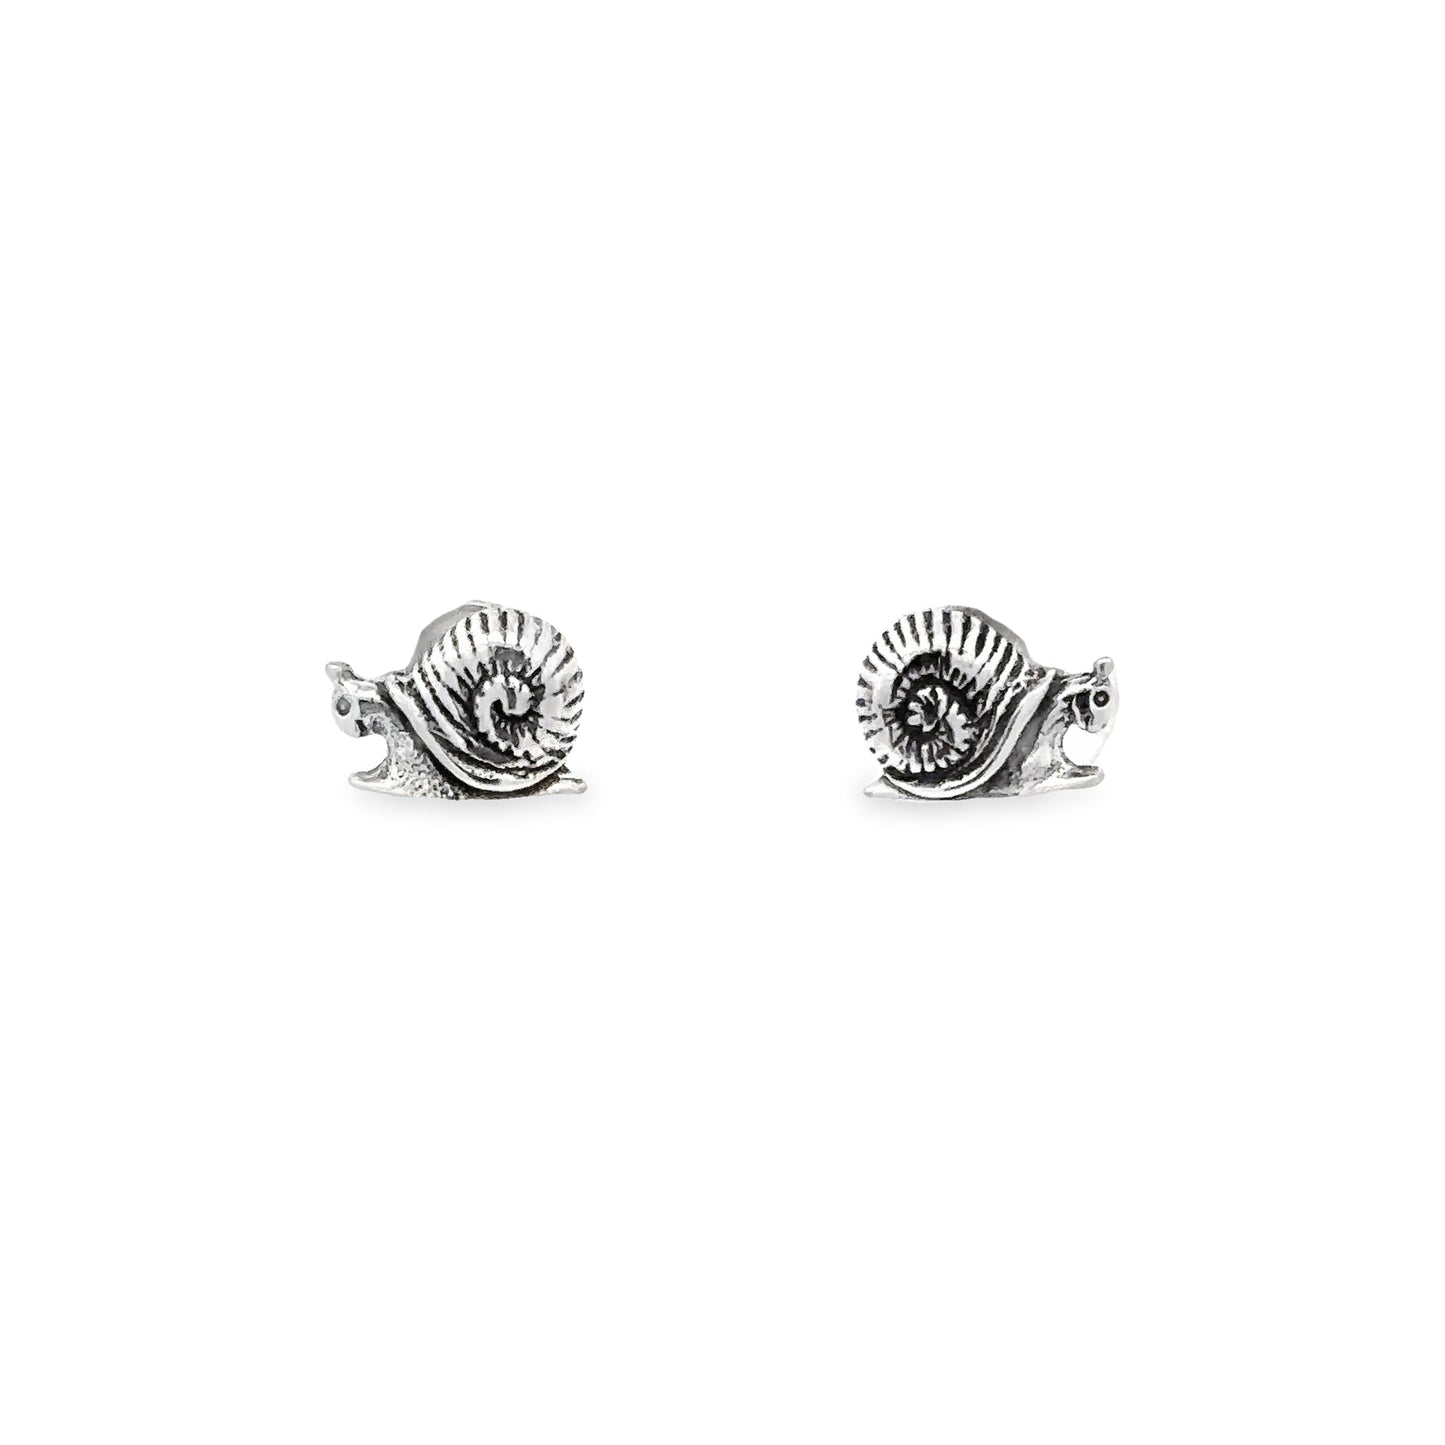 A pair of Snail Studs on a white background, adding a touch of whimsy.